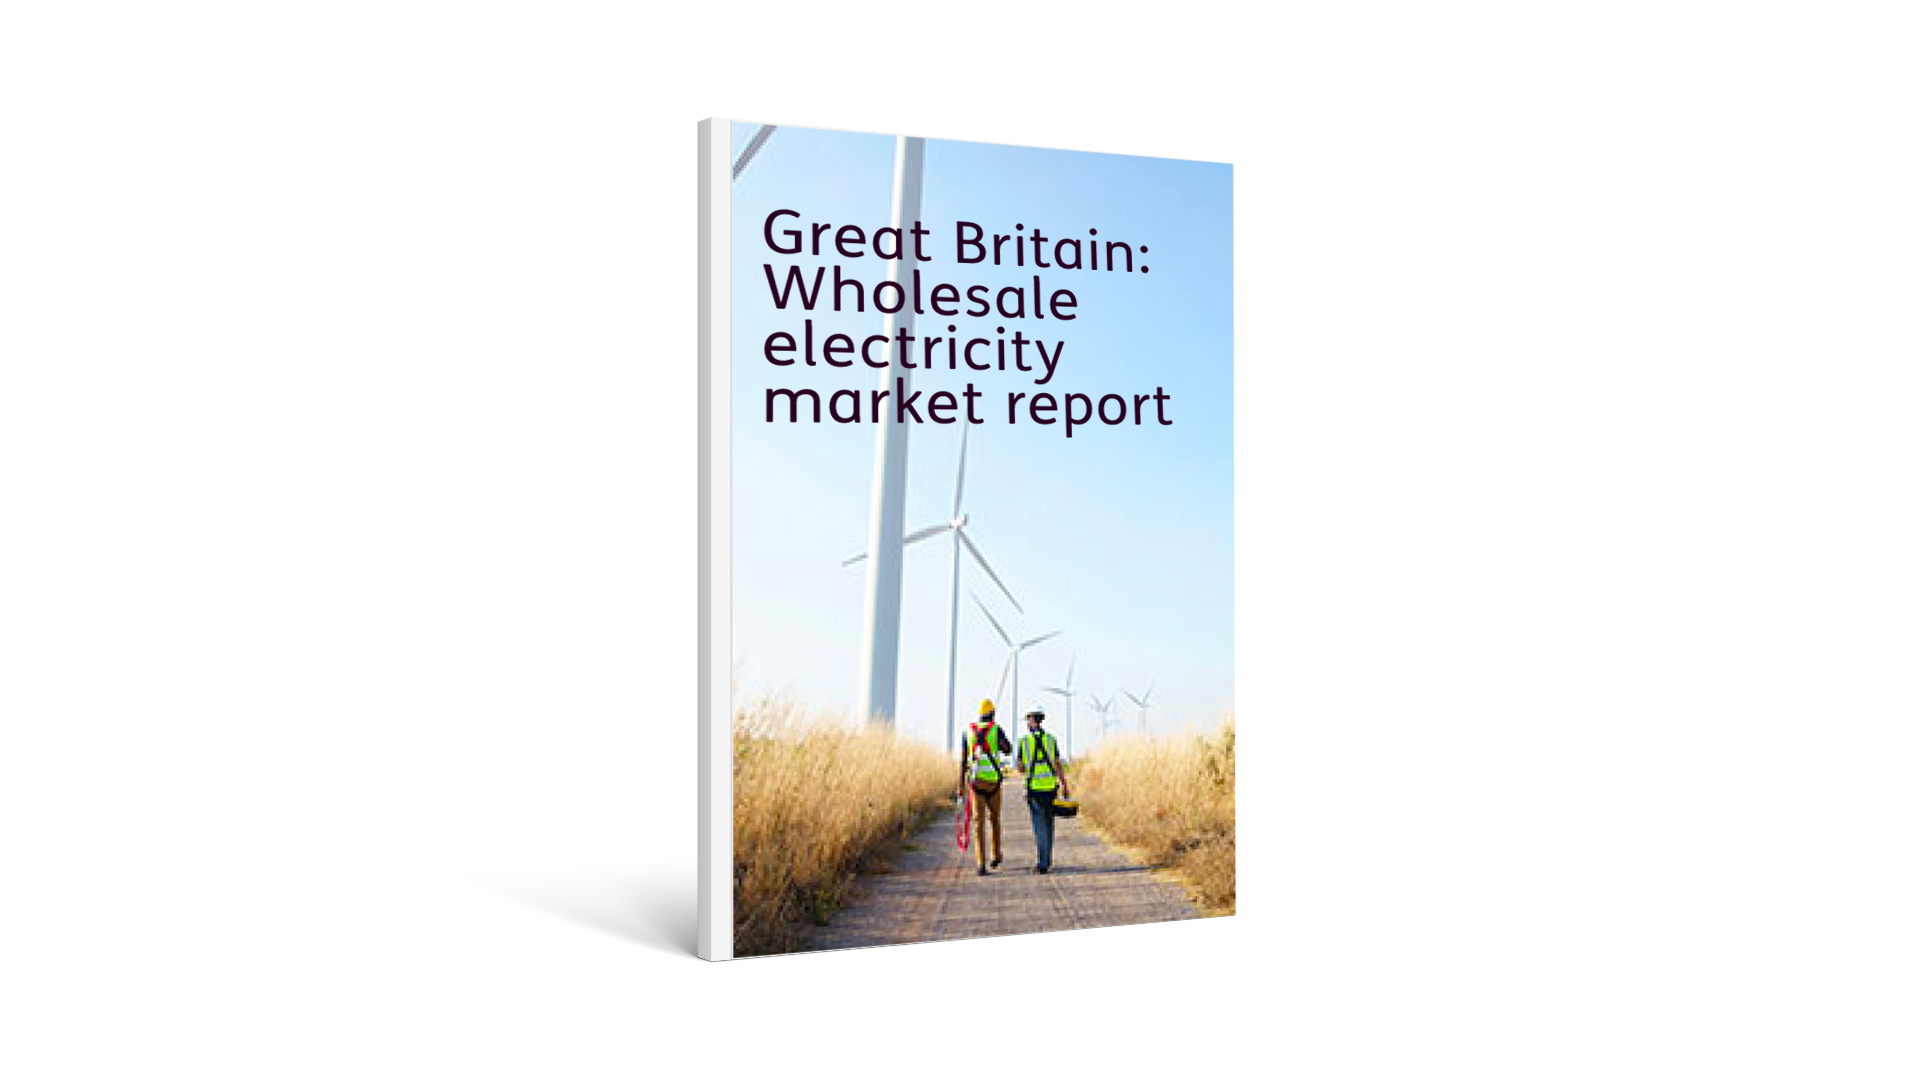 Great Britain: Wholesale electricity market report